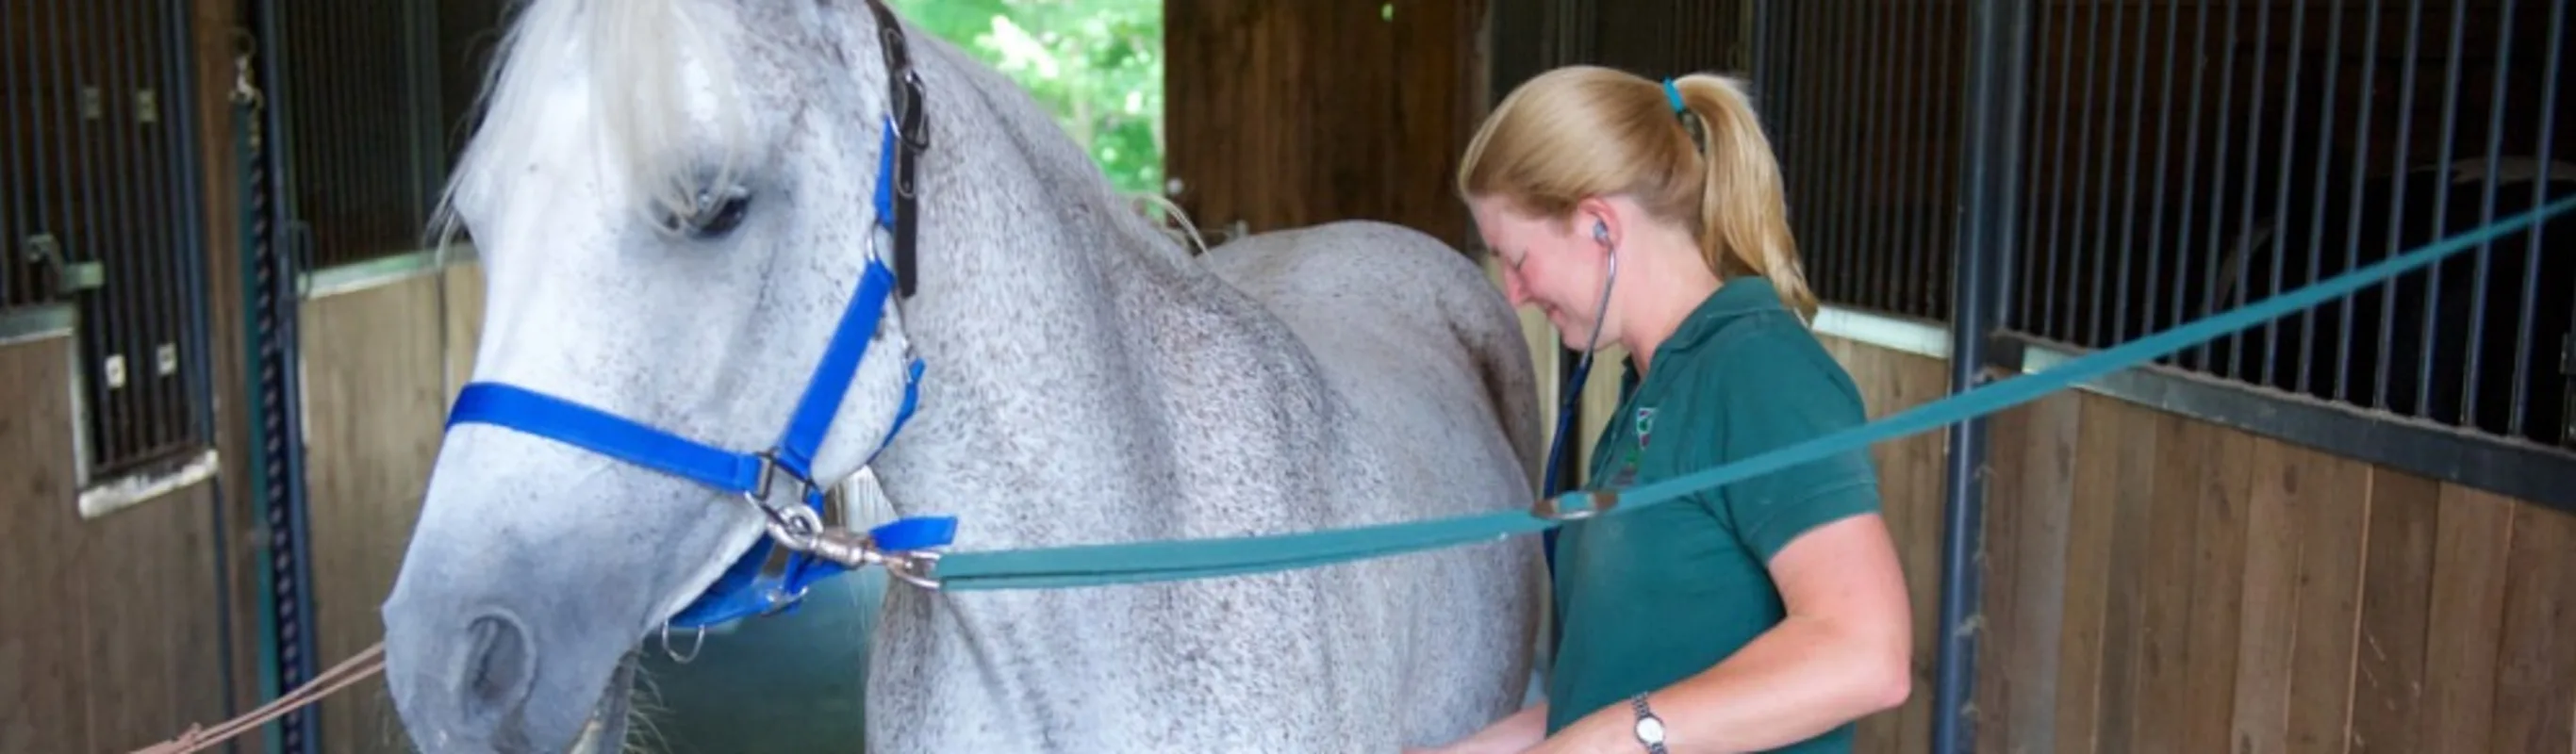 staff member examining a white horse